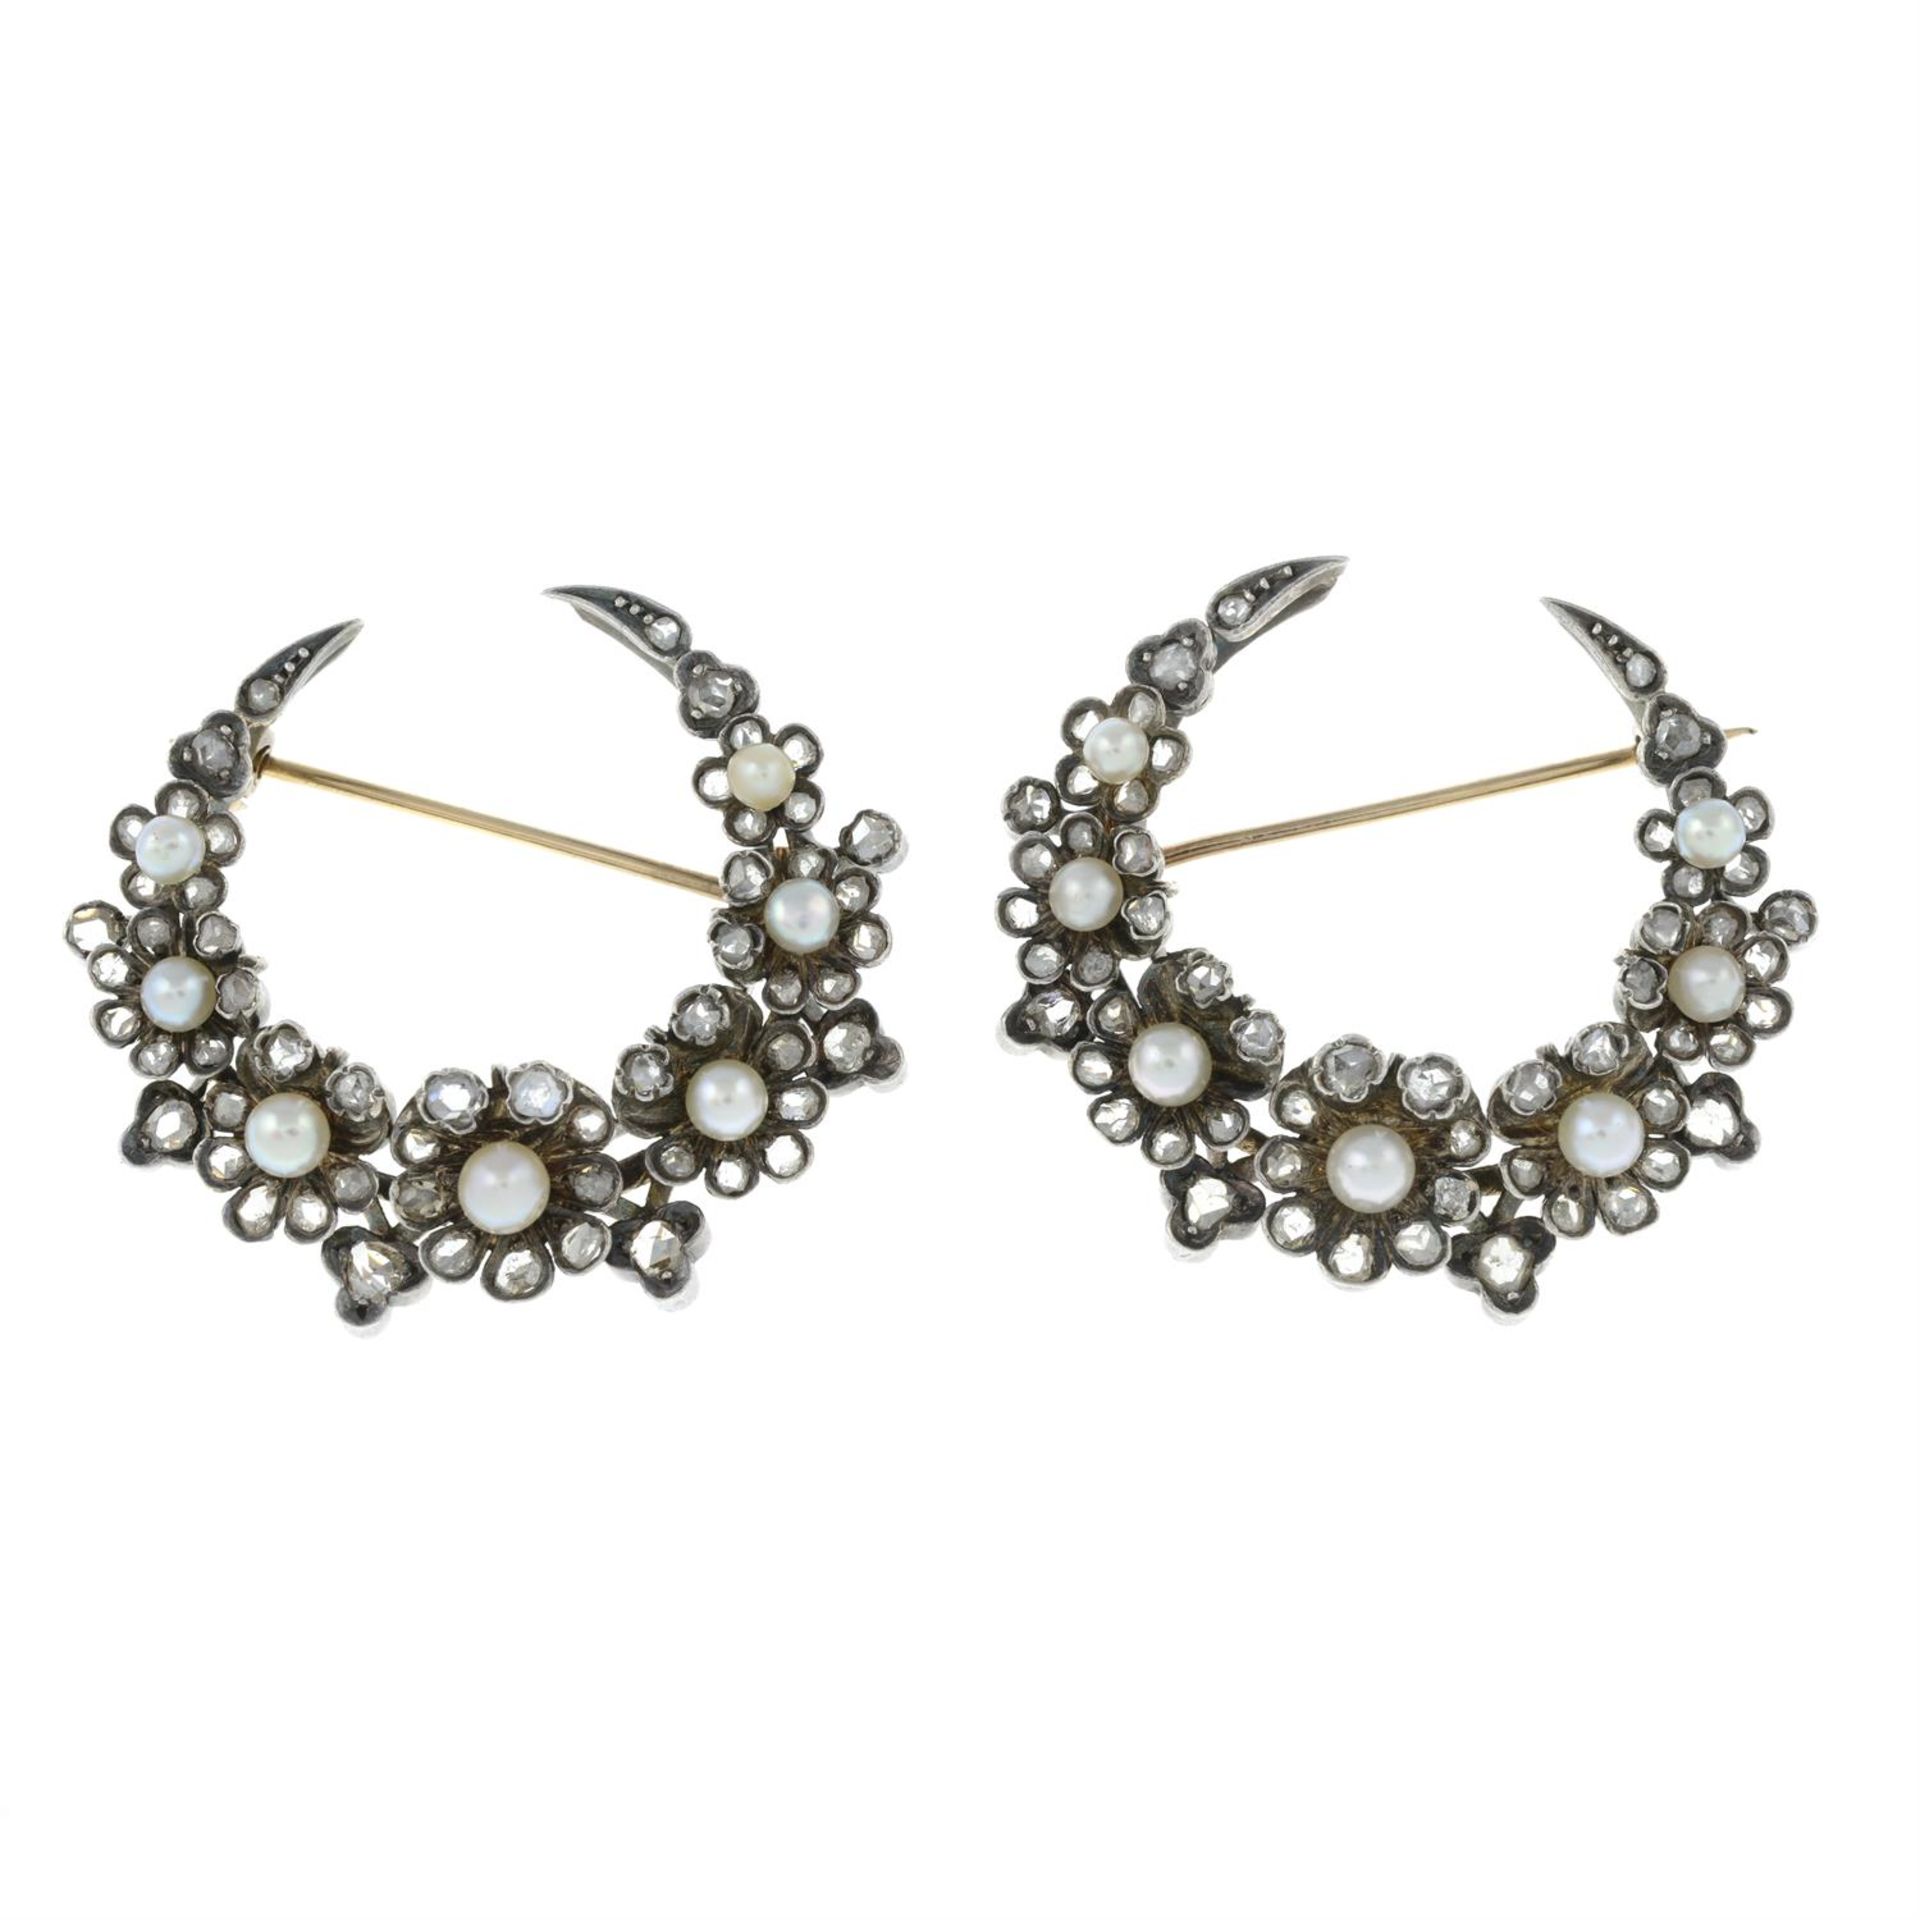 A pair of late Victorian silver and gold seed pearl and rose-cut diamond floral crescent moon